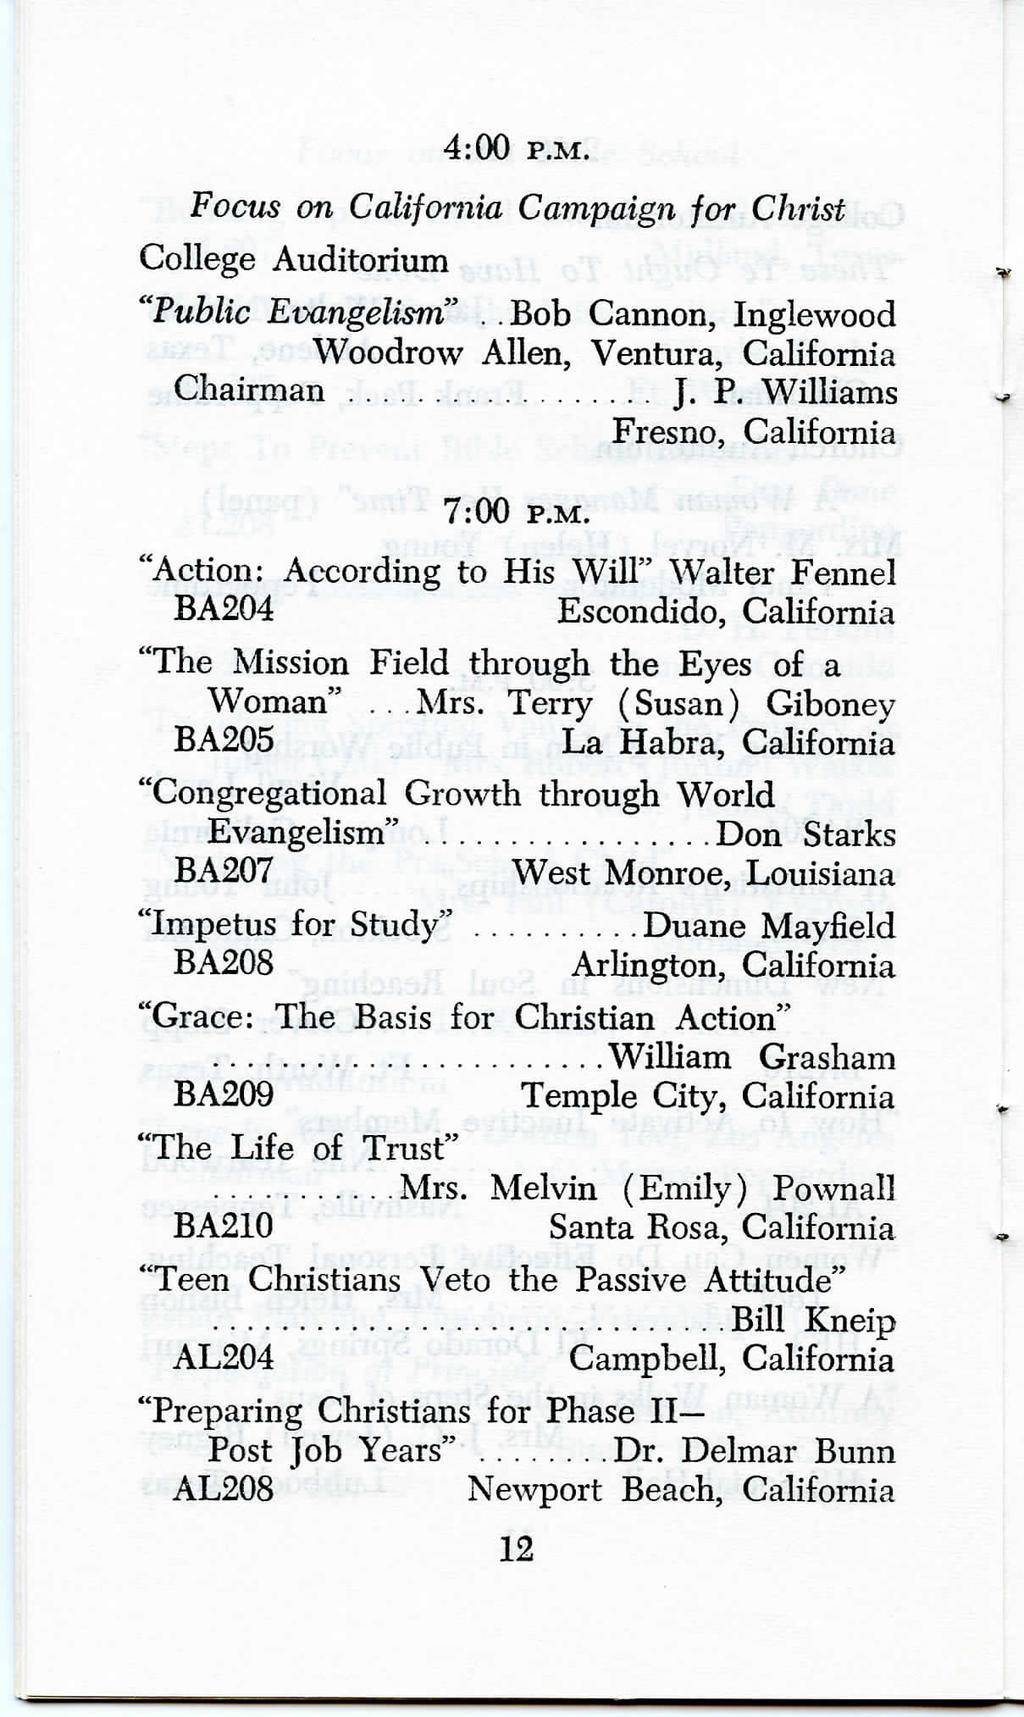 4:00 P.M. Focus on California Campaign for Christ "Public Evangelism".. Bob Cannon, Inglewood Woodrow Allen, Ventura, California Chairman J. P. Williams Fresno, California 7:00 P.M. "Action: According to His Will" Walter Fennel BA204 Escondido, California "The Mission Field through the Eyes of a Woman".